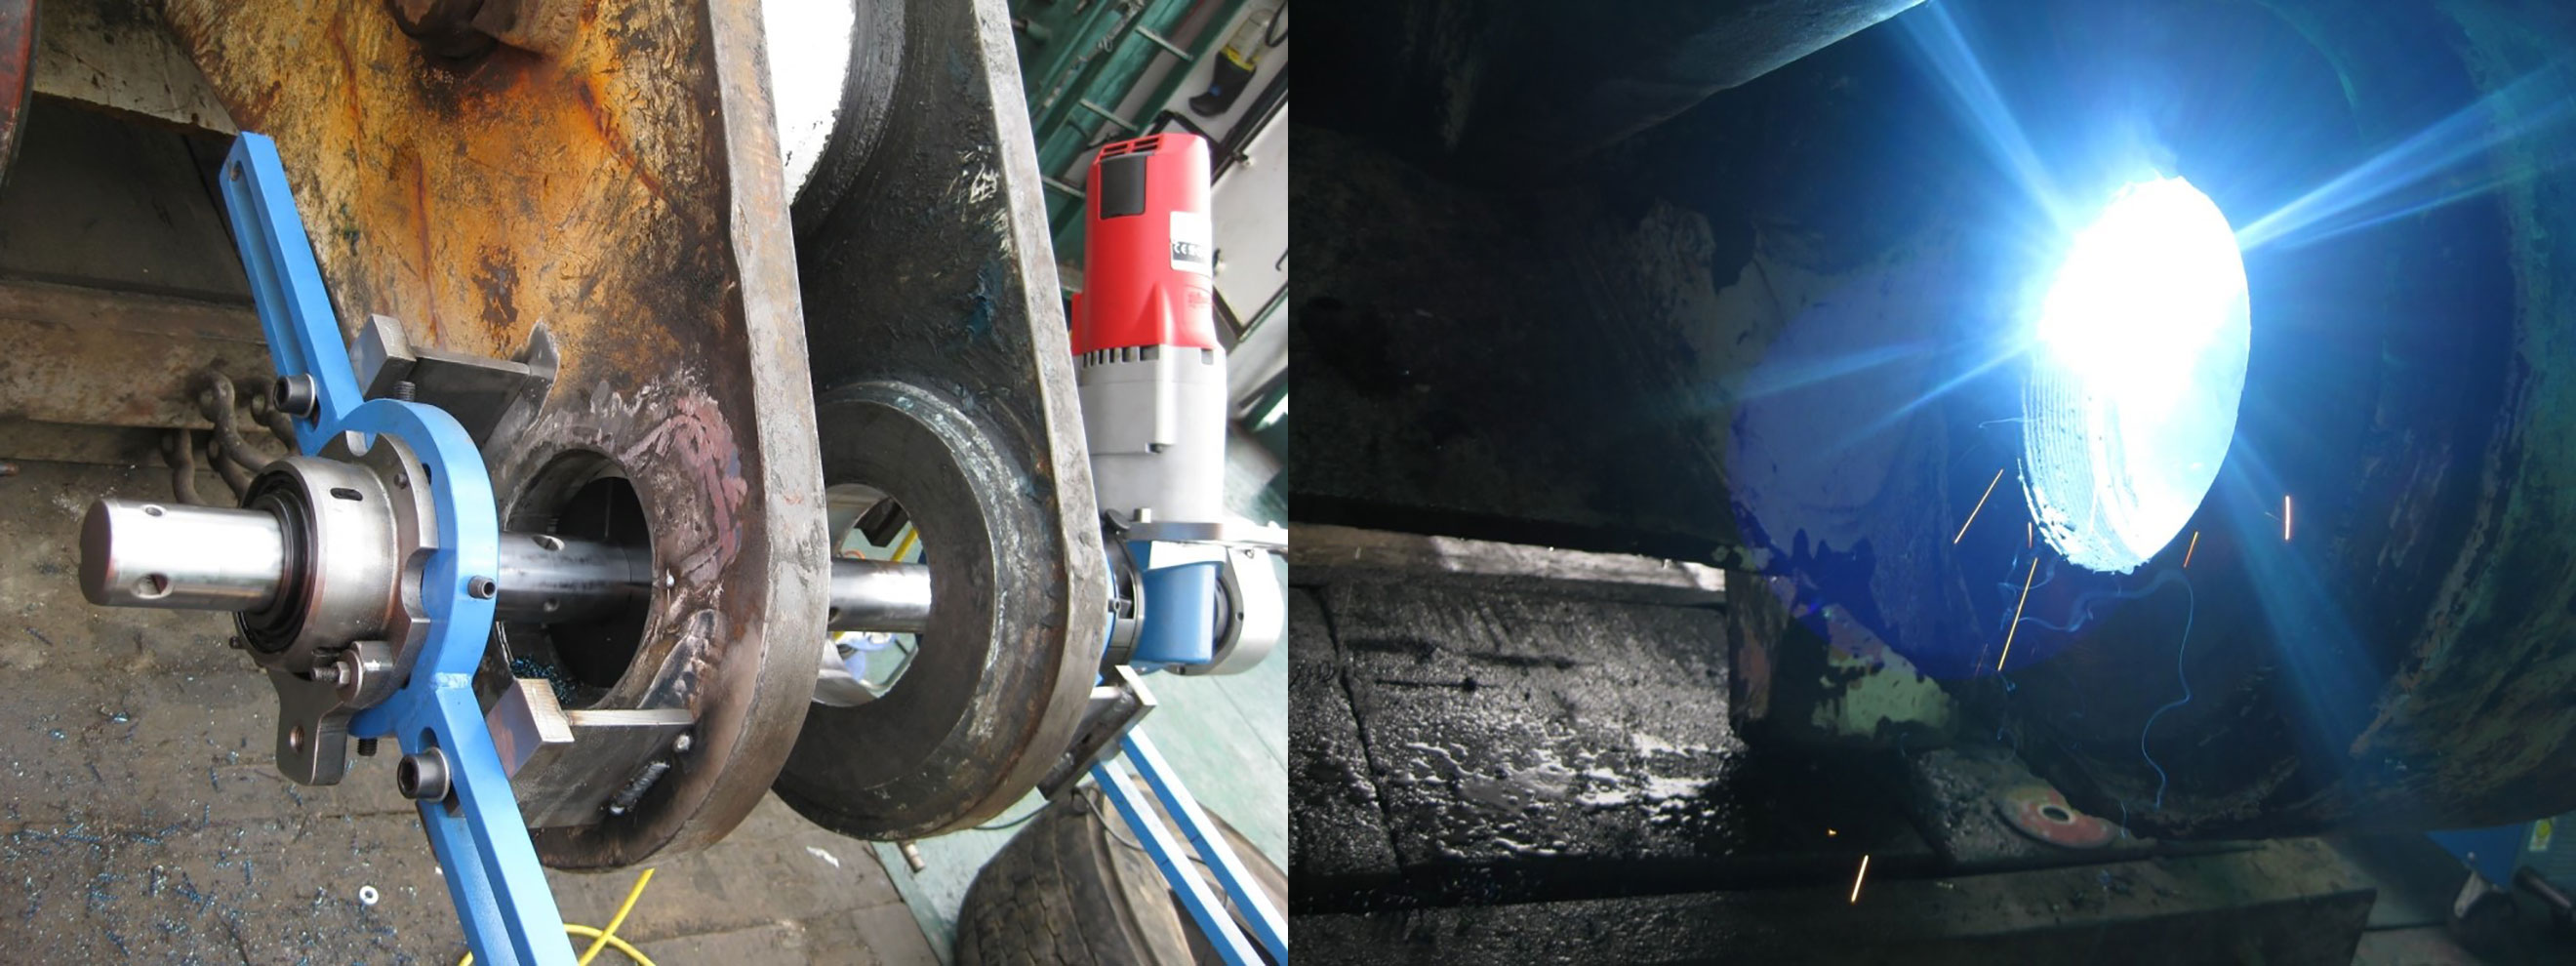 Mobile drilling and welding